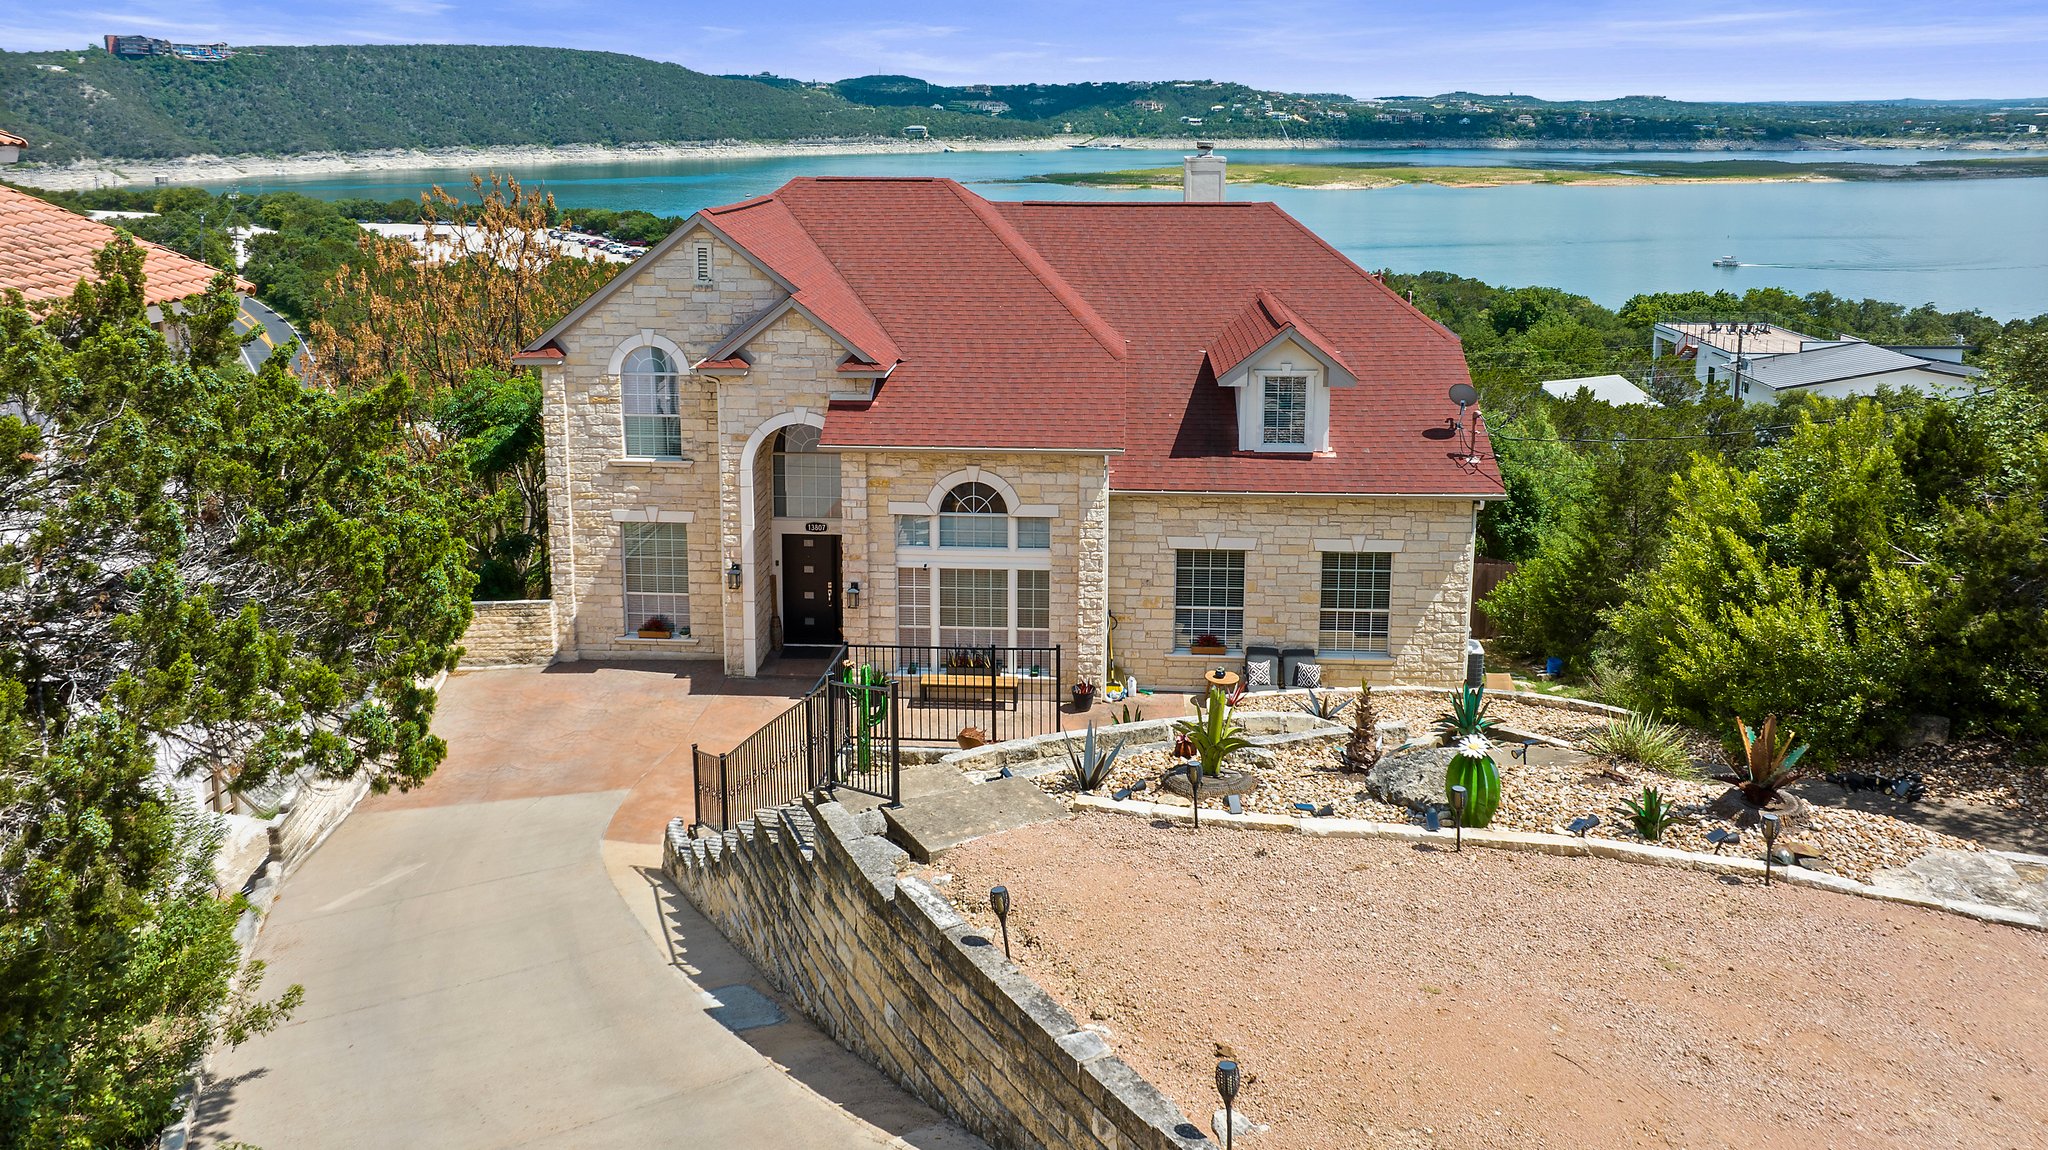 Stunning home with gorgeous views of Lake Travis